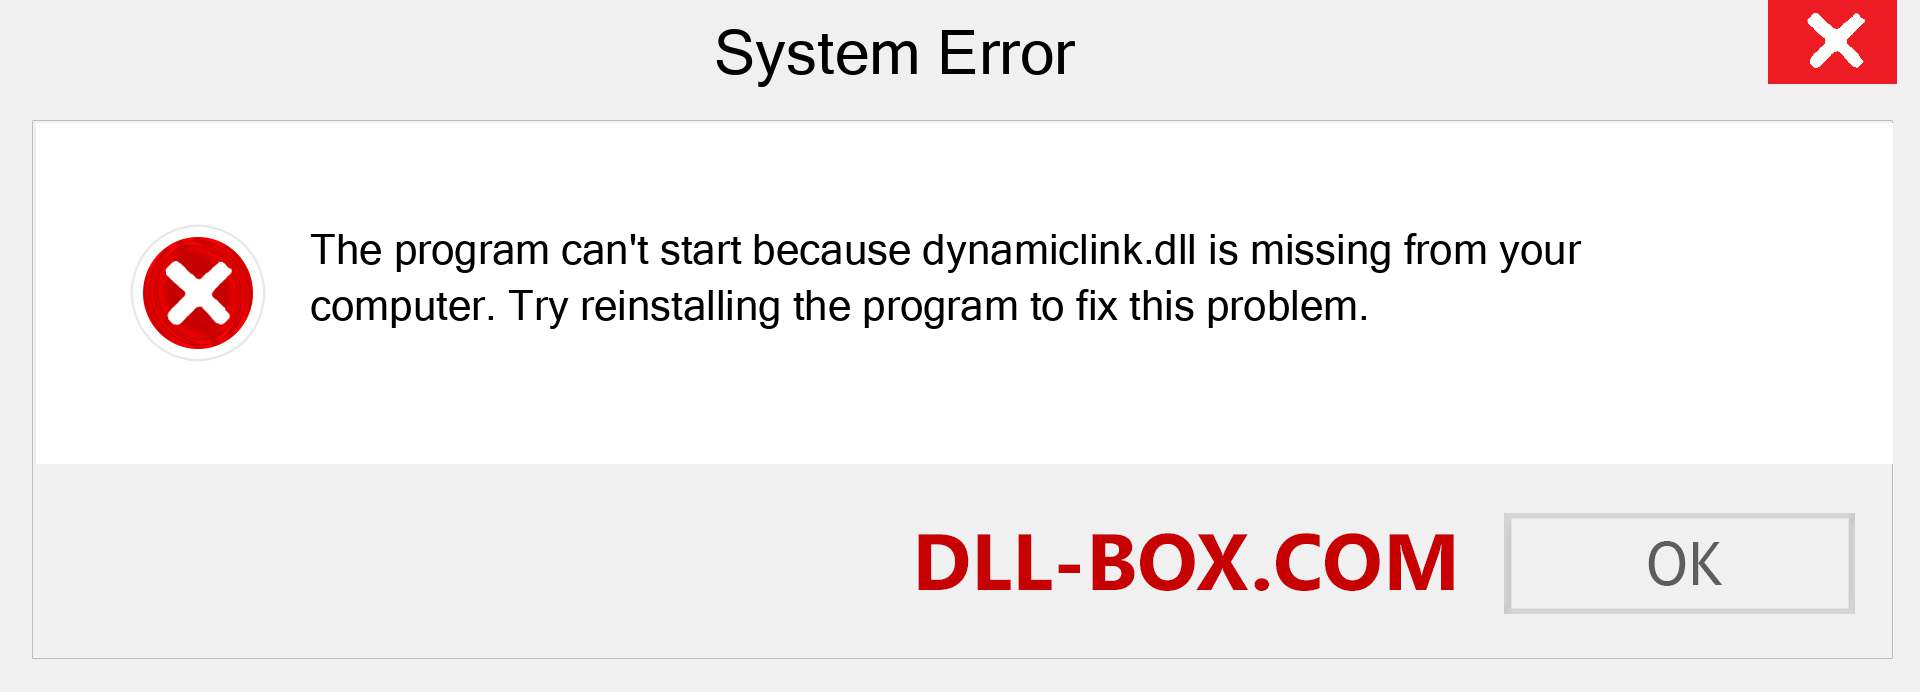  dynamiclink.dll file is missing?. Download for Windows 7, 8, 10 - Fix  dynamiclink dll Missing Error on Windows, photos, images